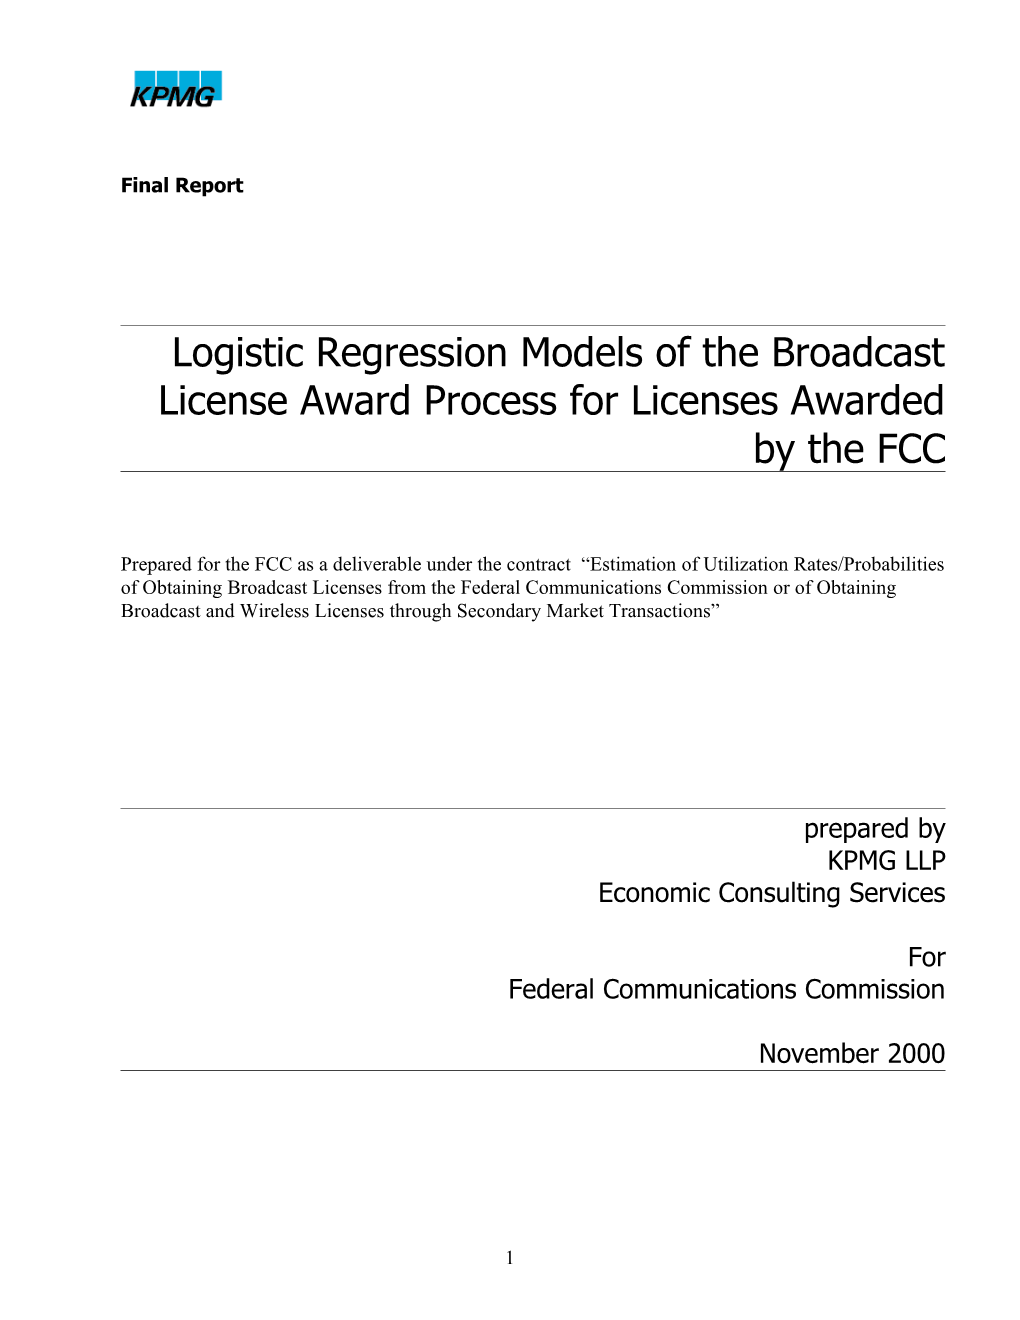 Logistic Regression Models of the Broadcast License Award Process for Licenses Awarded